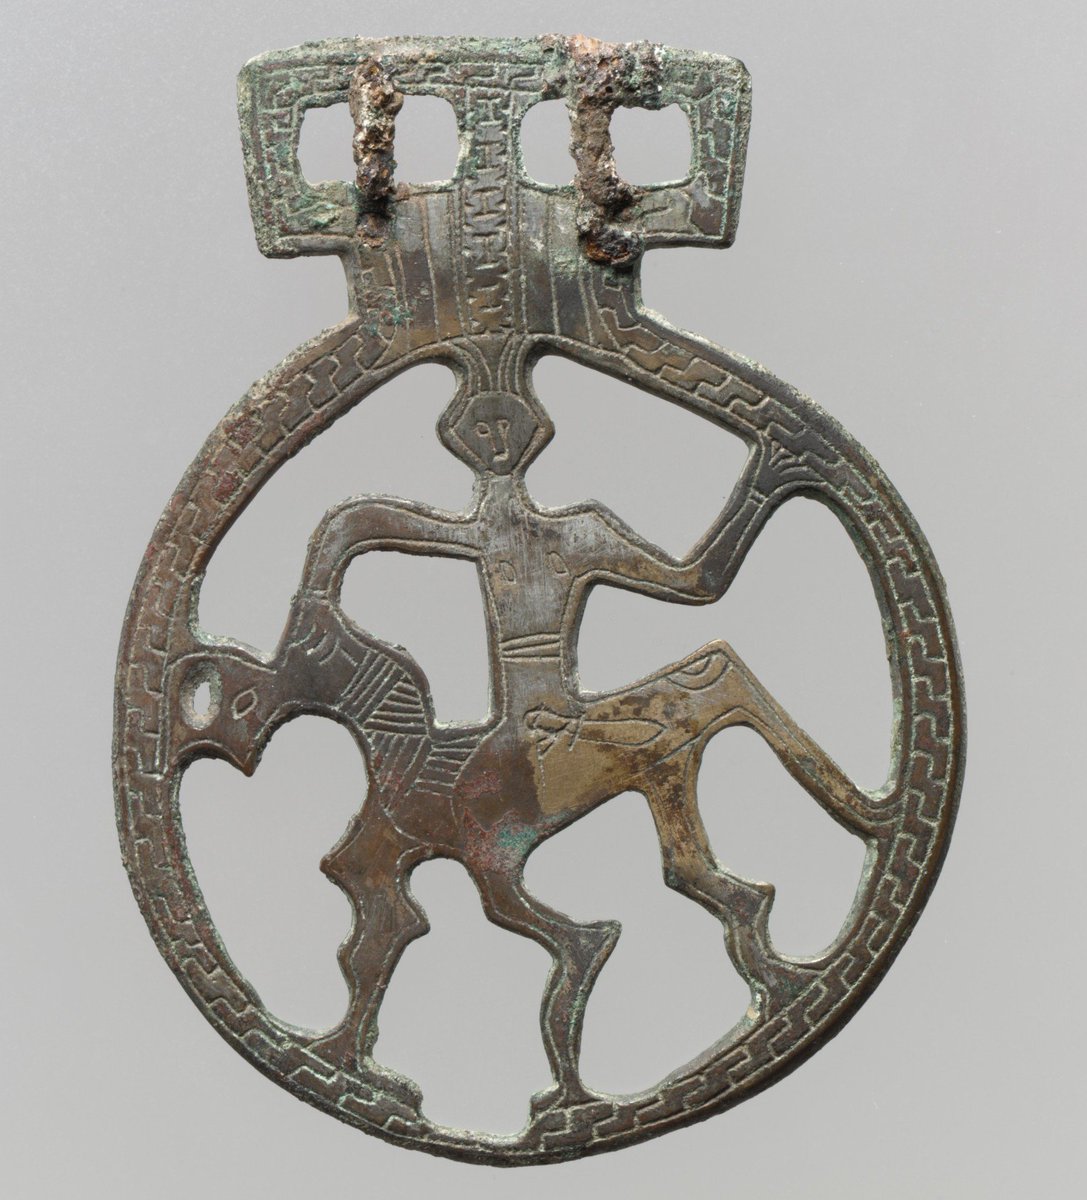 These examples are all in the Metropolitan Museum of Art, with a 7th - 8th century date. They are key rings, basically, hung from the belt, with tools, keys or ornaments hanging from the different loops. In some places, the wear marks are really clear. Copper alloy, often tinned.